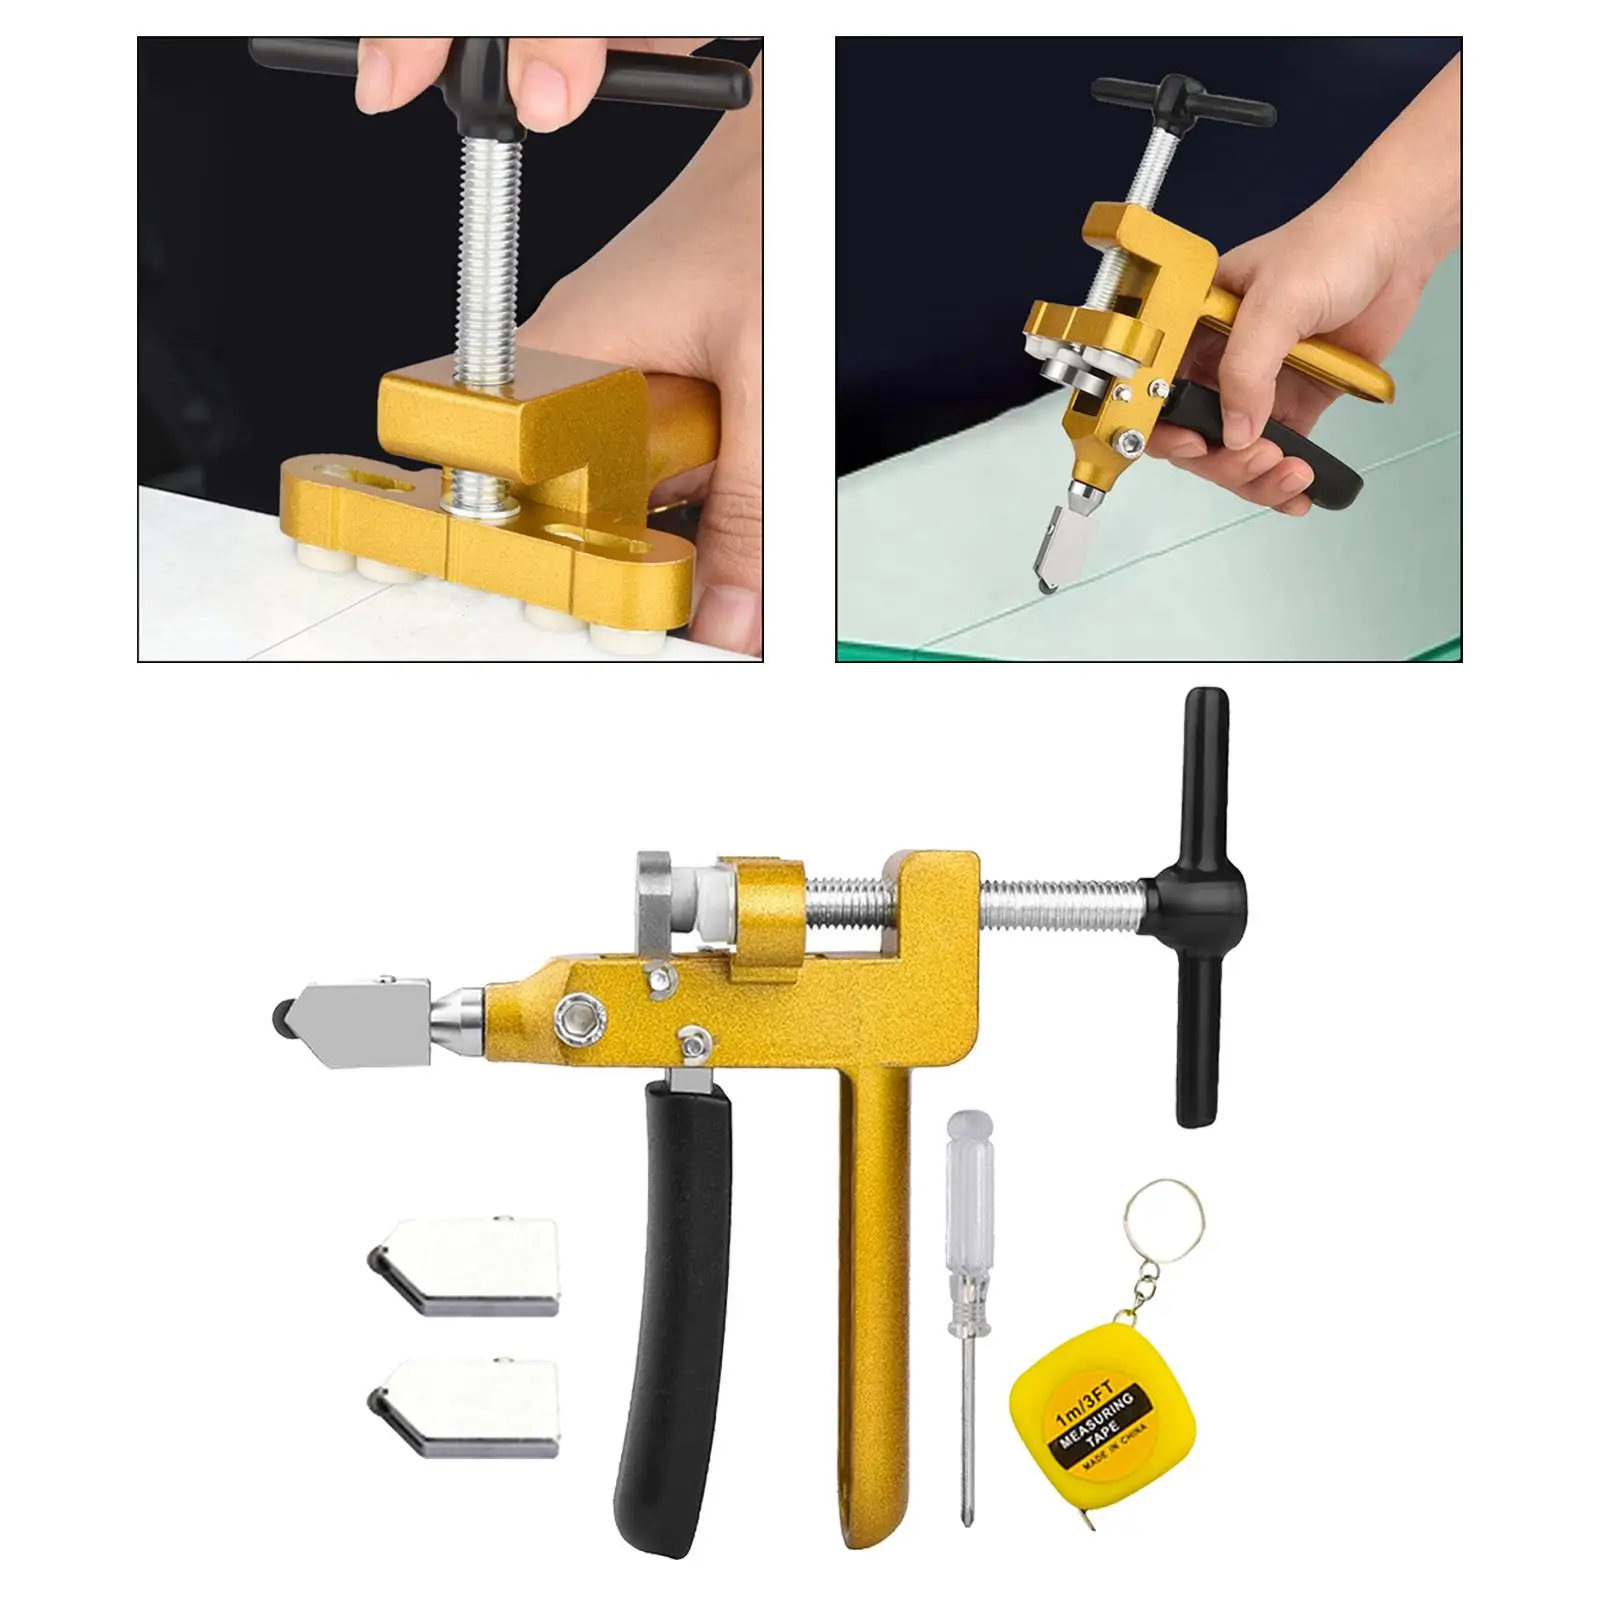 Glass Cutting Tool Multifunctional Portable Comfortable Gripping Manual Tile Cutter Tool Glass Tile Cutter Breaker Glass Cutter